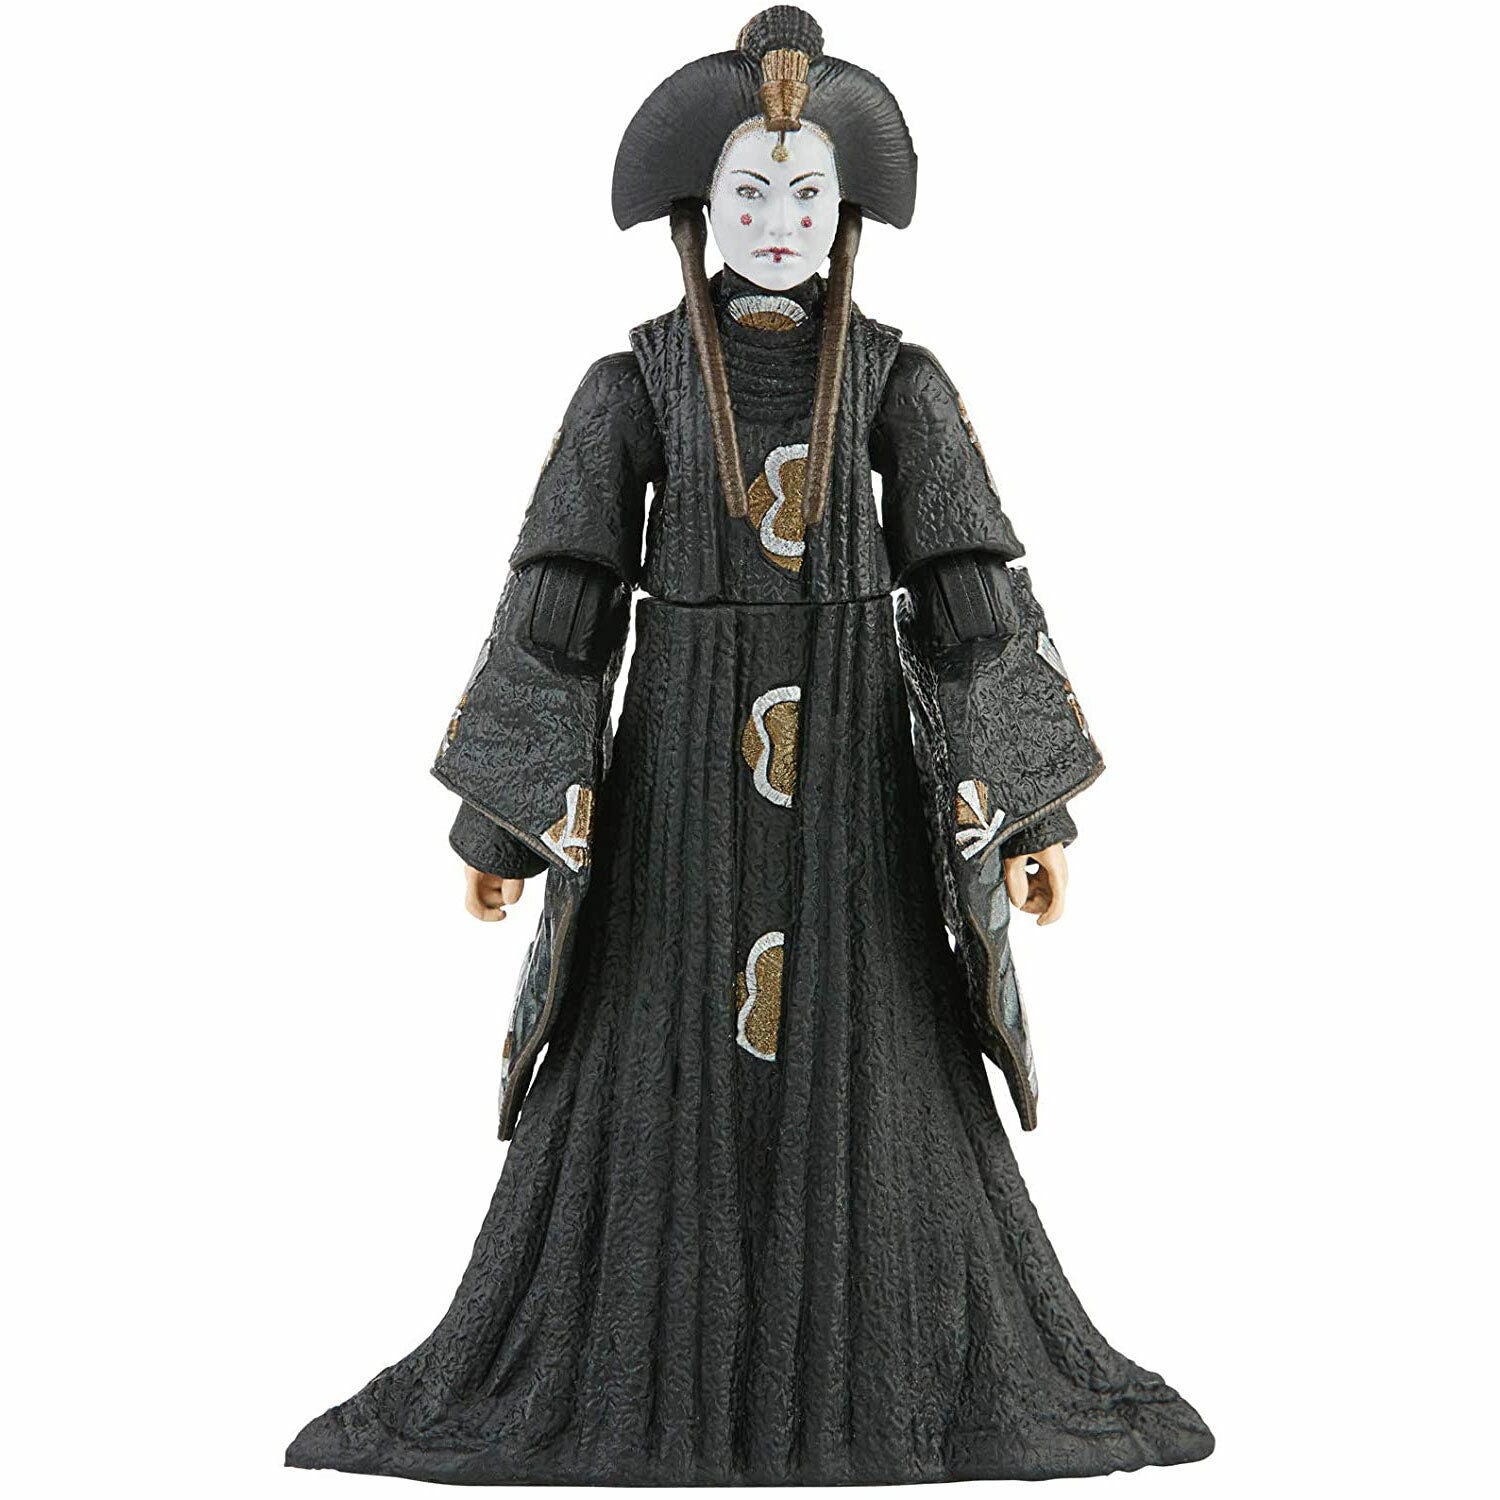 "Star Wars Vintage Collection Queen Amidala 3.75" Action Figure - New in Box"